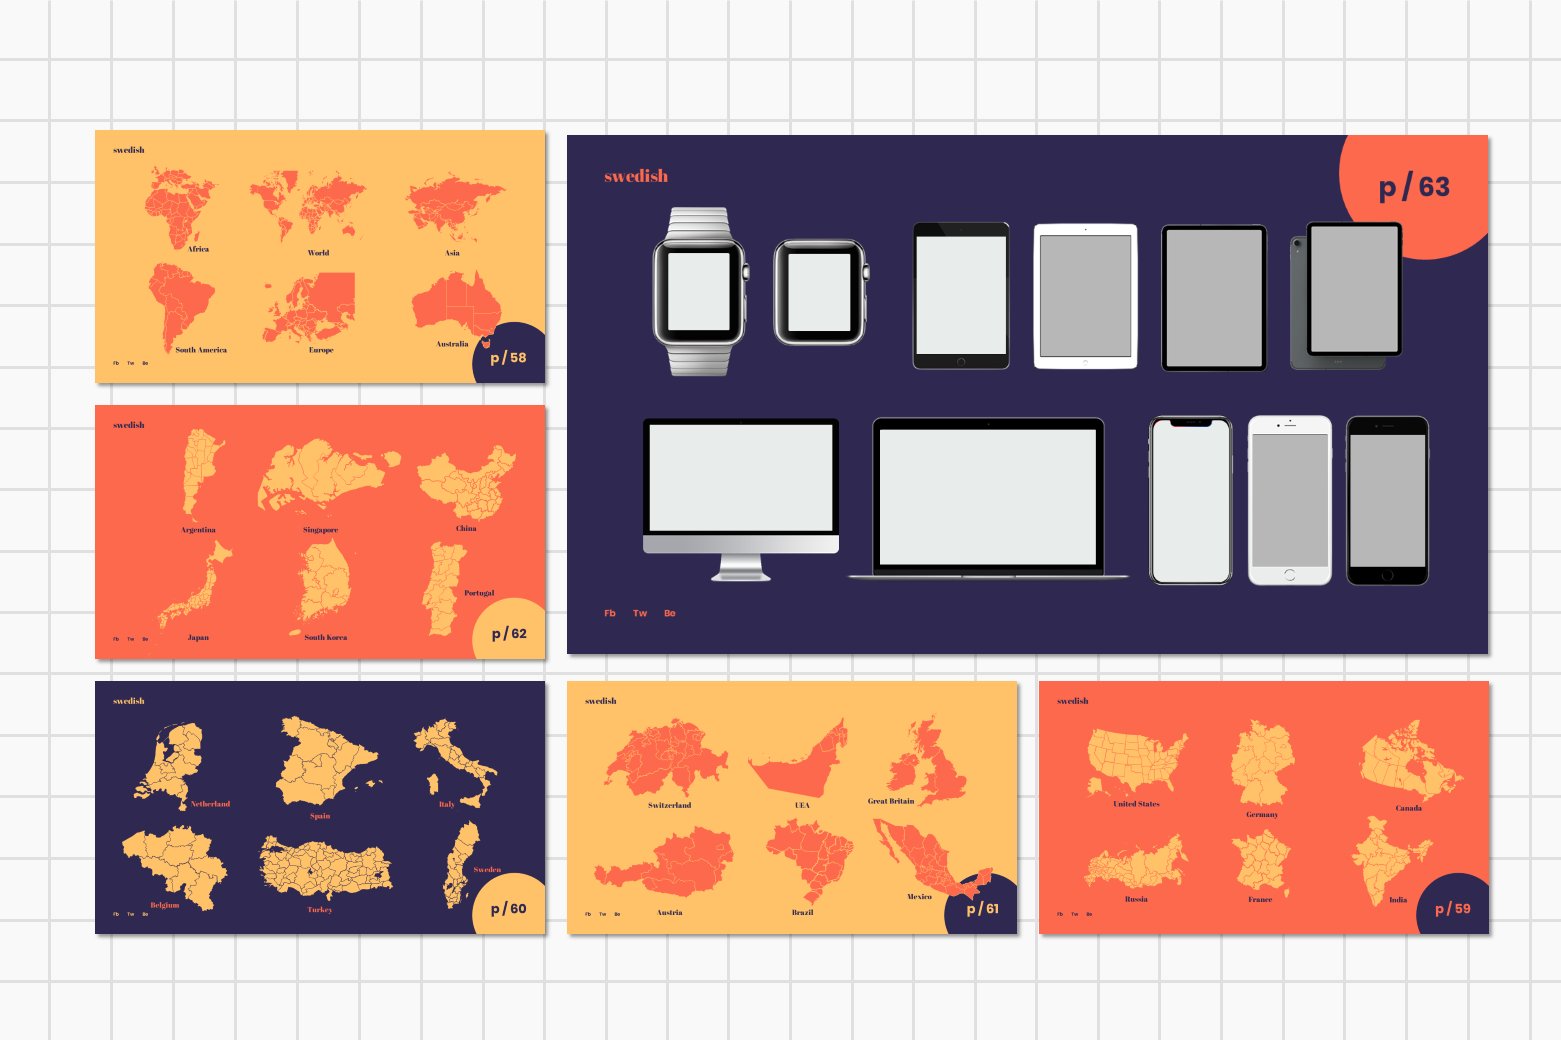 Swedish Powerpoint contains a nice map collection.